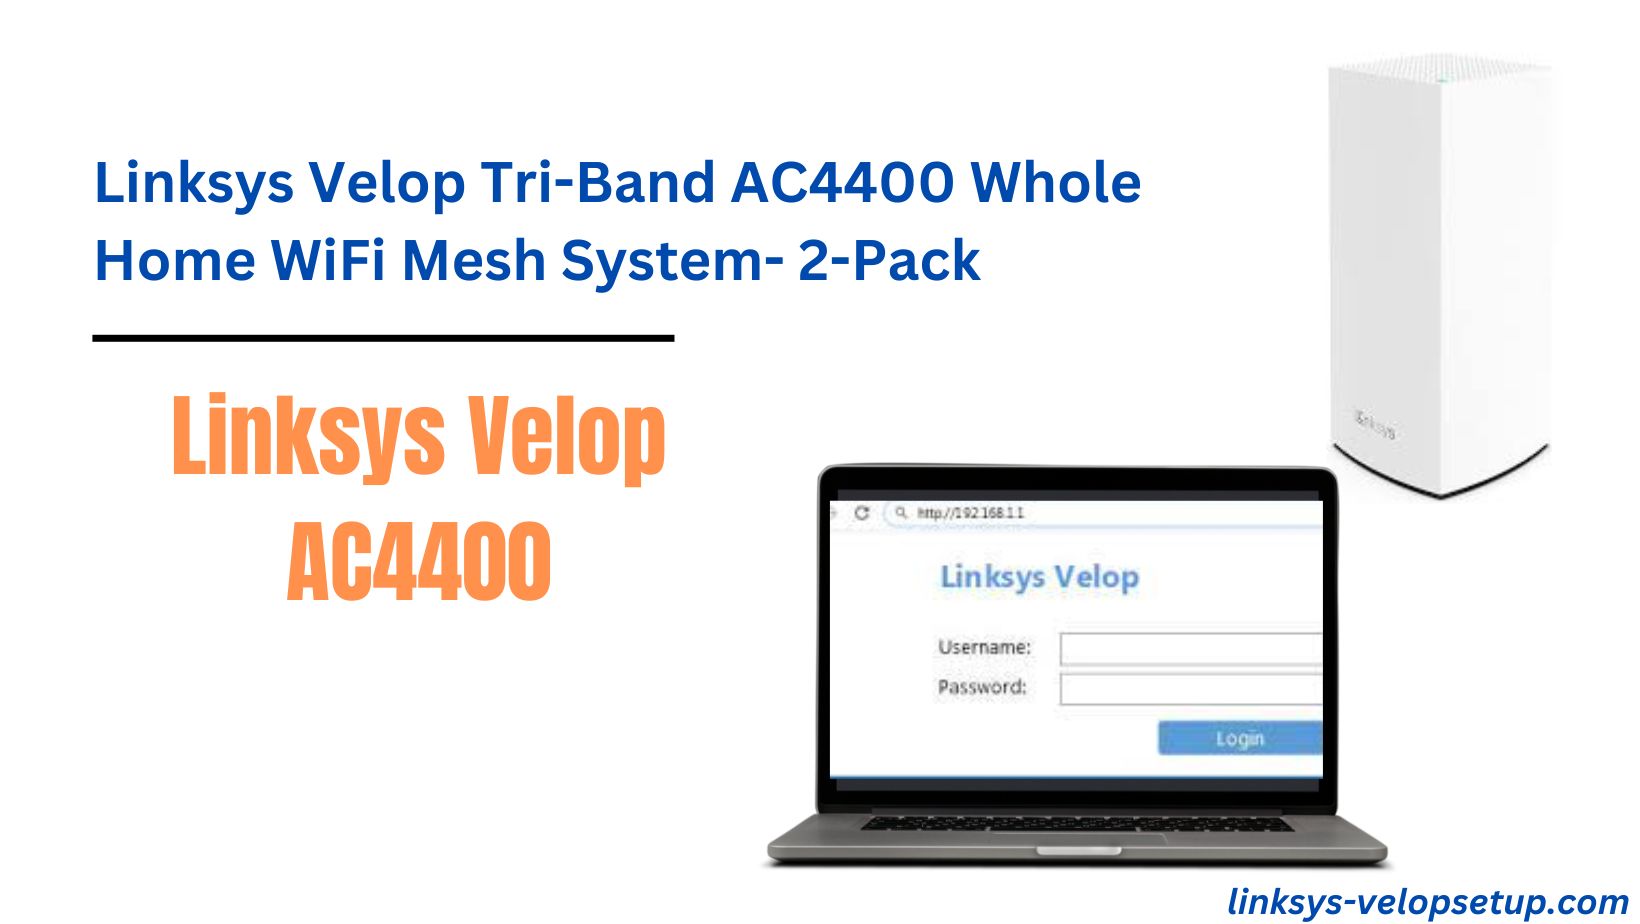 You are currently viewing Linksys Velop Tri-Band AC4400 Whole Home WiFi Mesh System- 2-Pack